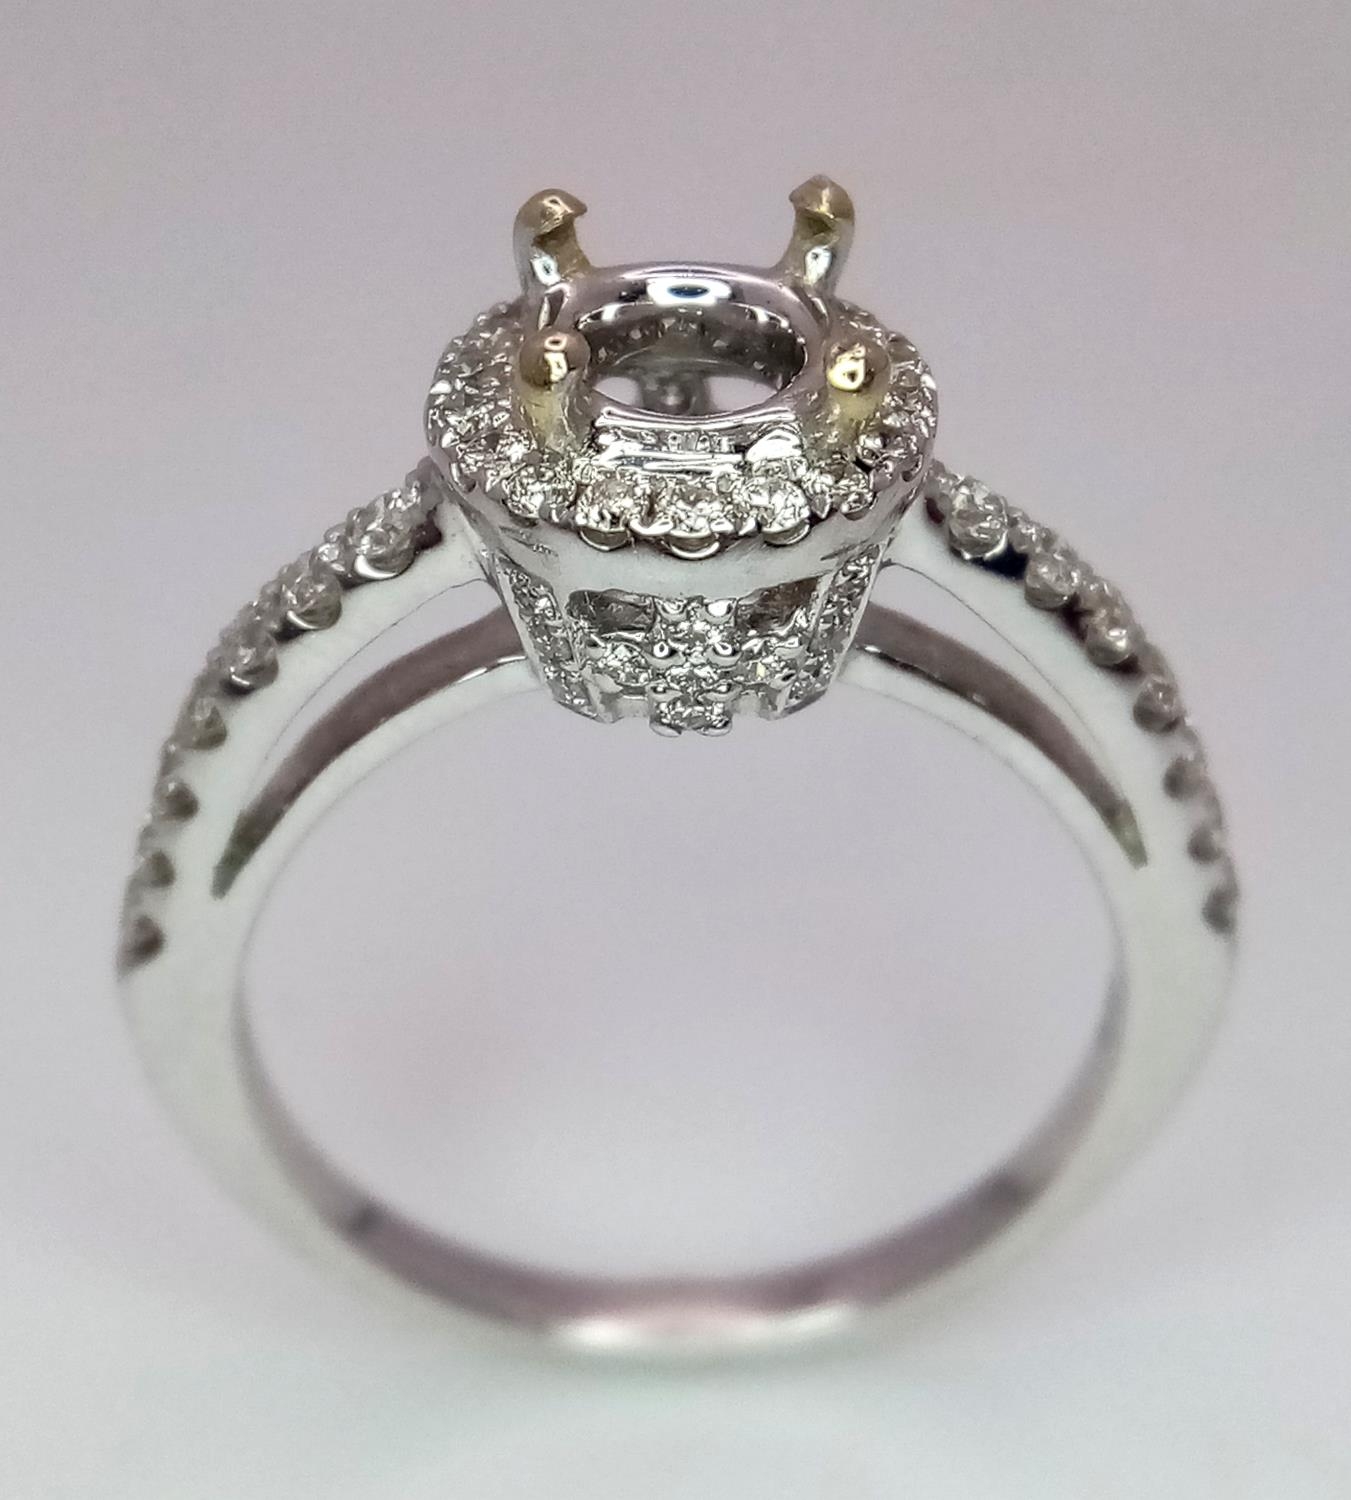 AN 18K WHITE GOLD DIAMOND HALO SOLITAIRE RING MOUNT WITH DIAMOND SET SHOULDERS. Ready to set your - Image 2 of 8